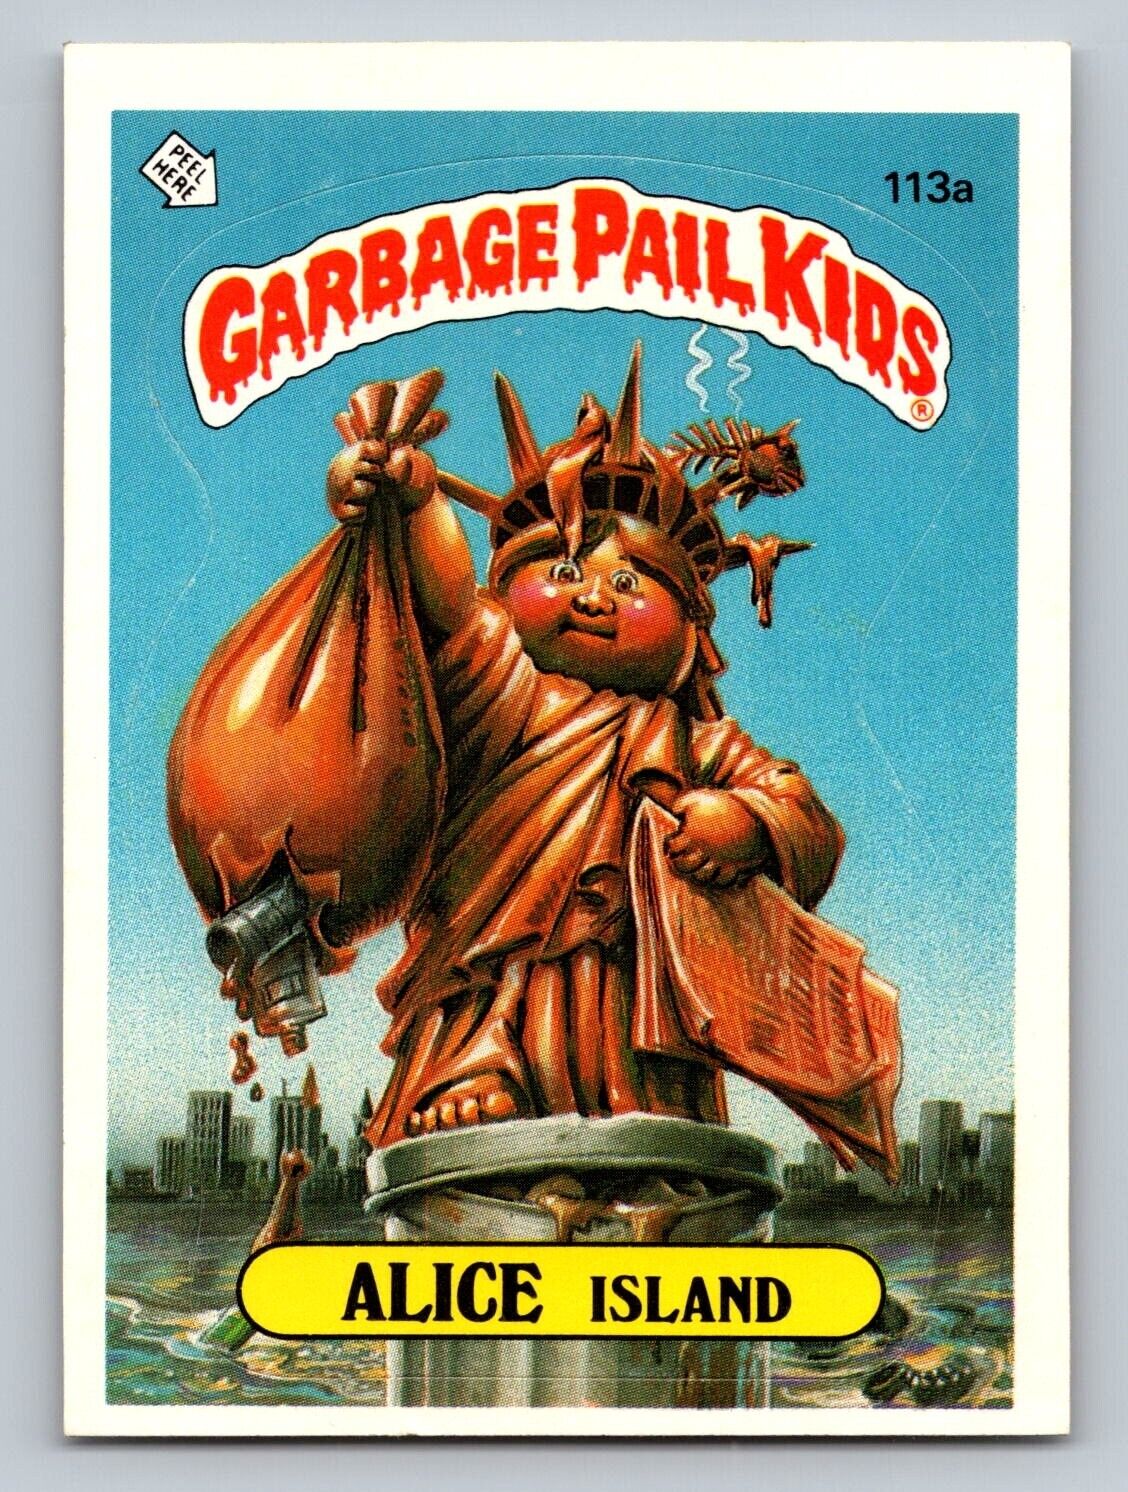 1986 Topps - Alice Island - Garbage Pail Kids - Series 3 - Stickers - #113a